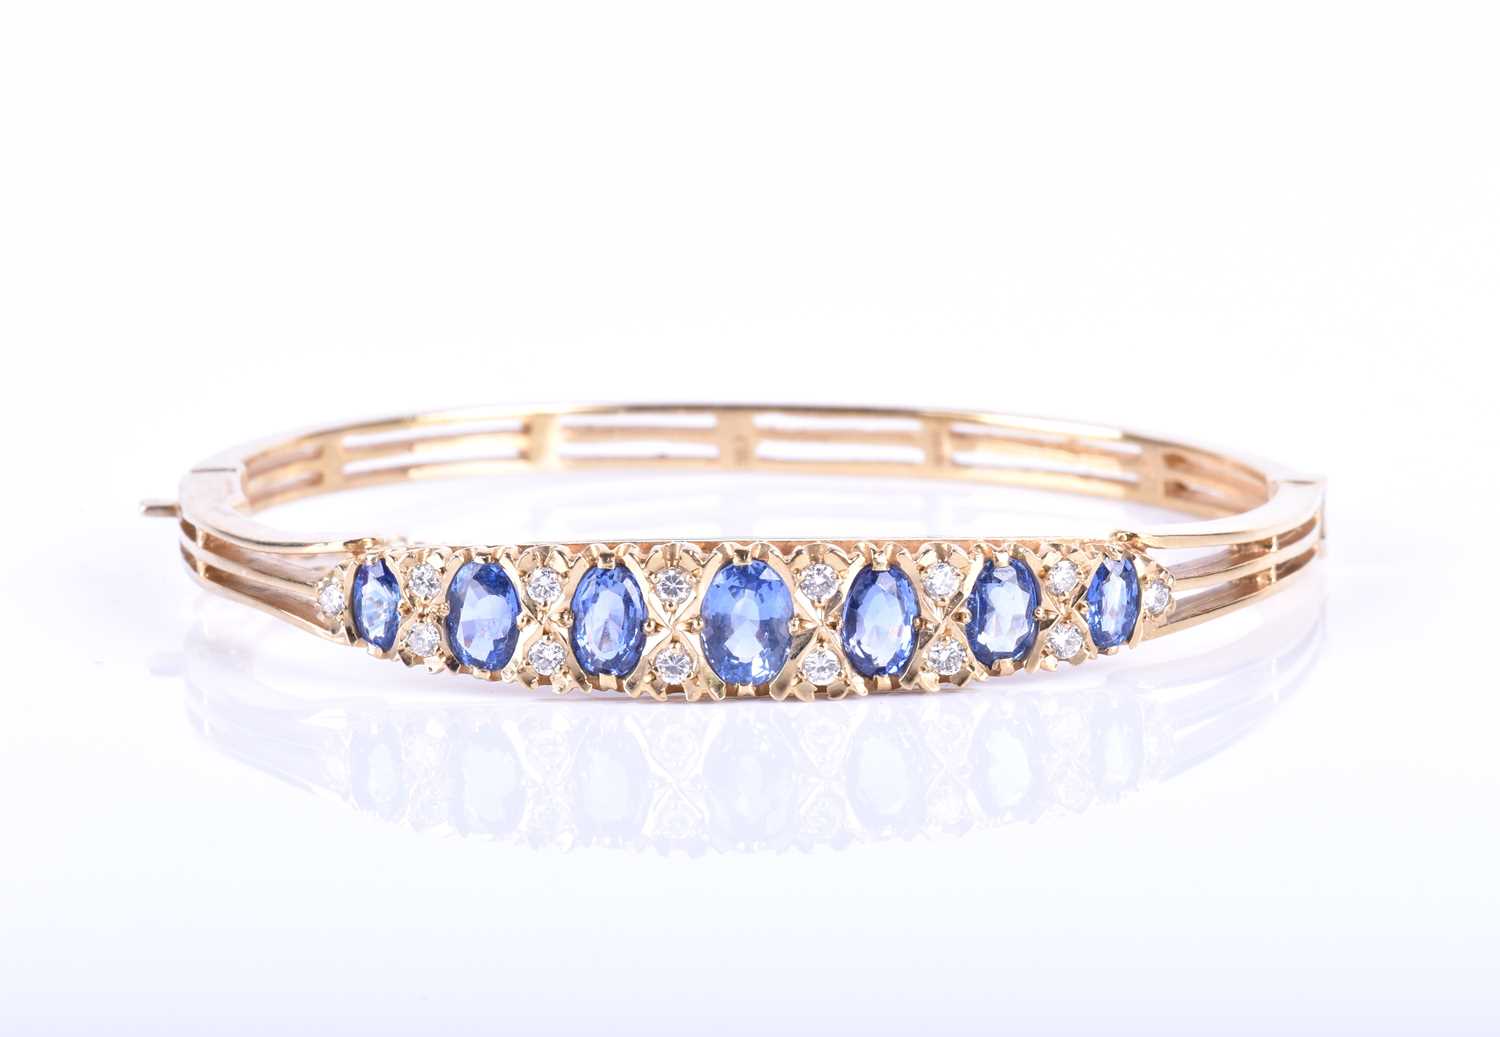 A 9ct yellow gold, diamond and sapphire bangle, set with seven graduated mixed oval cut blue